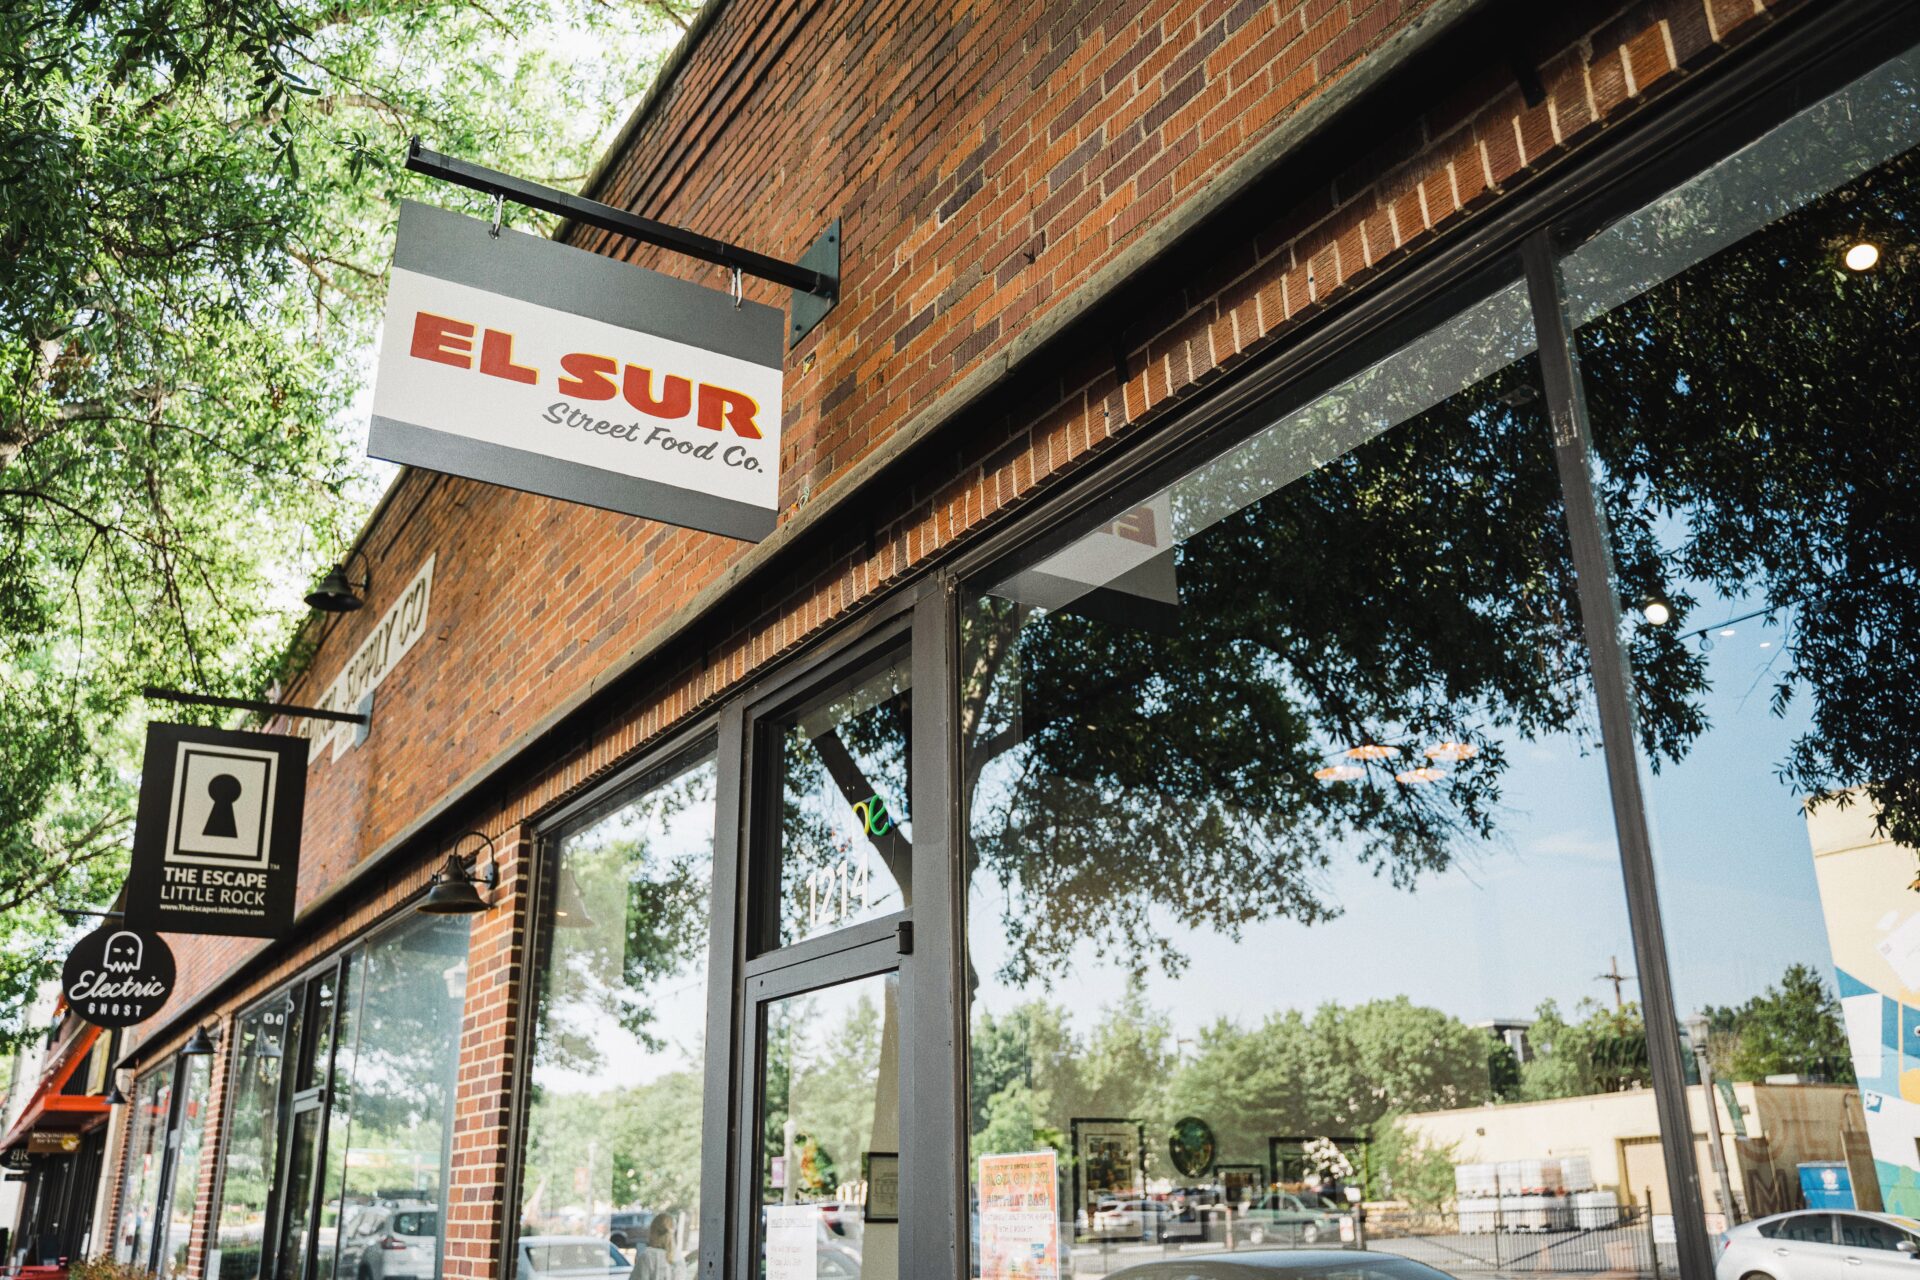 Exterior and sign for El Sur Street Food Co. in Little Rock 